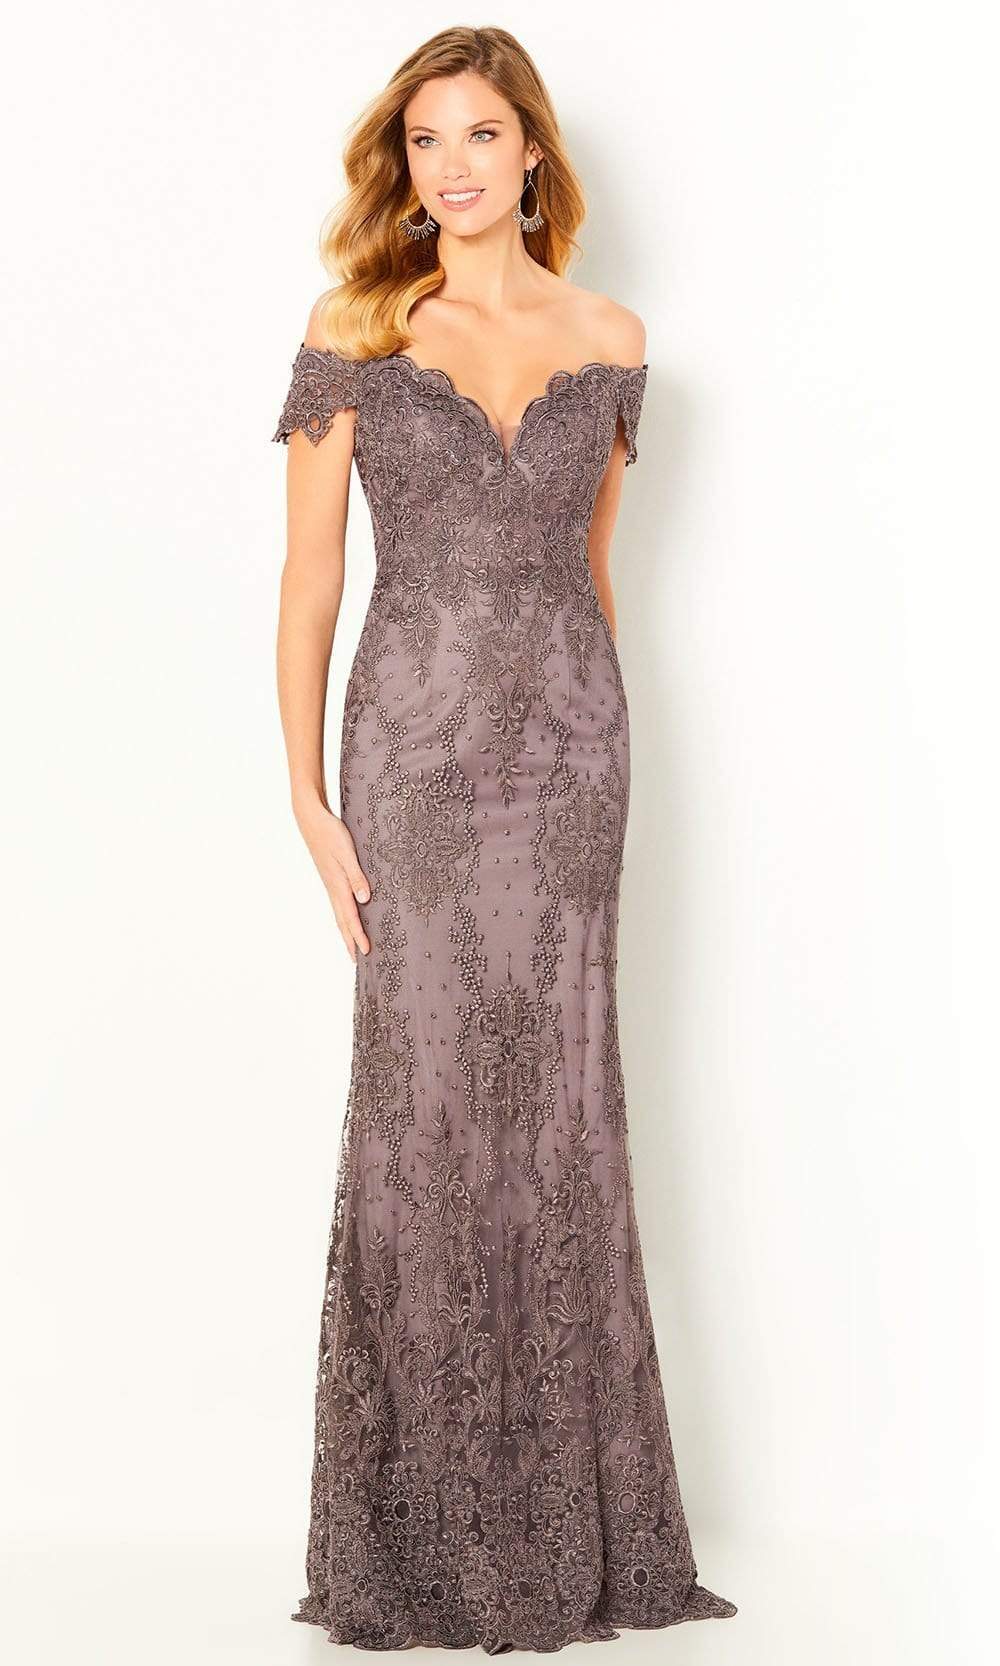 Mon Cheri - Corded Lace Mermaid Gown 220631 - 1 pc Smoke In Size 12 Available CCSALE 12 / Smoke